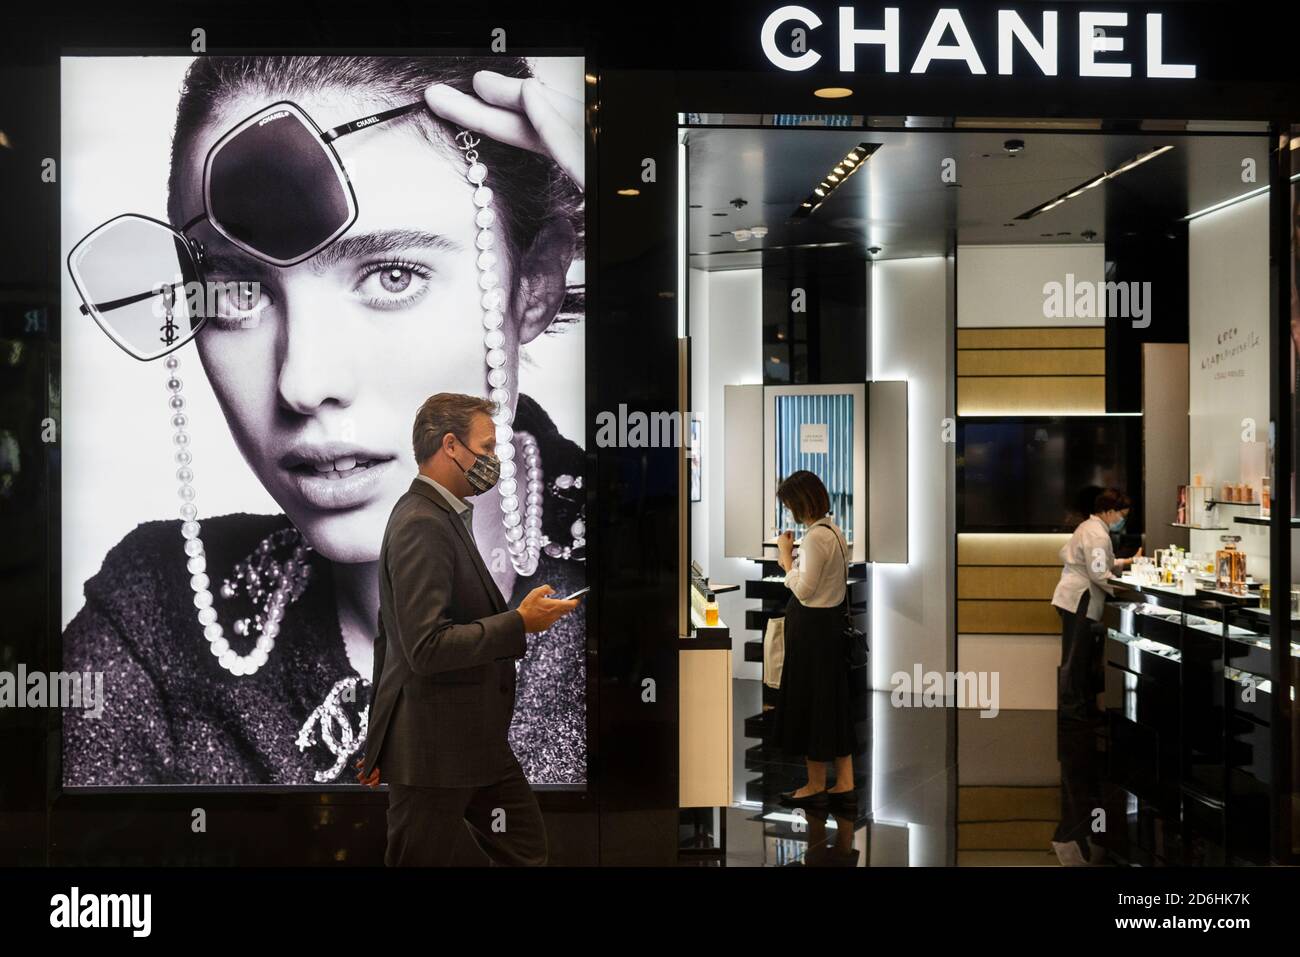 French multinational Chanel clothing and beauty products brand